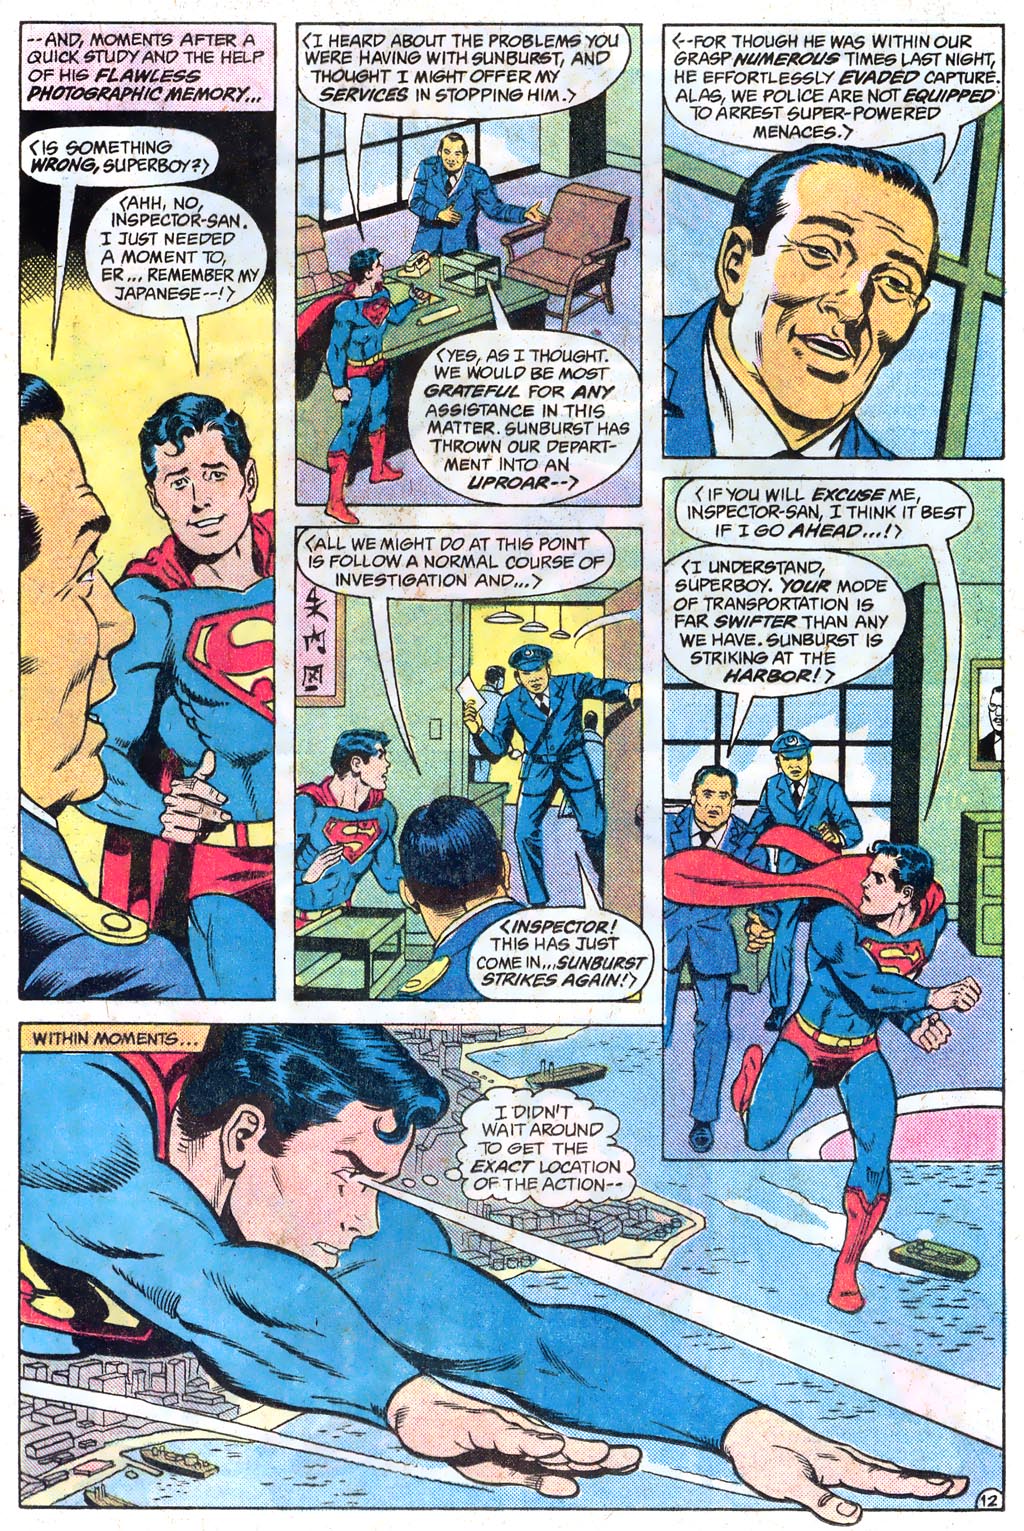 The New Adventures of Superboy 45 Page 16